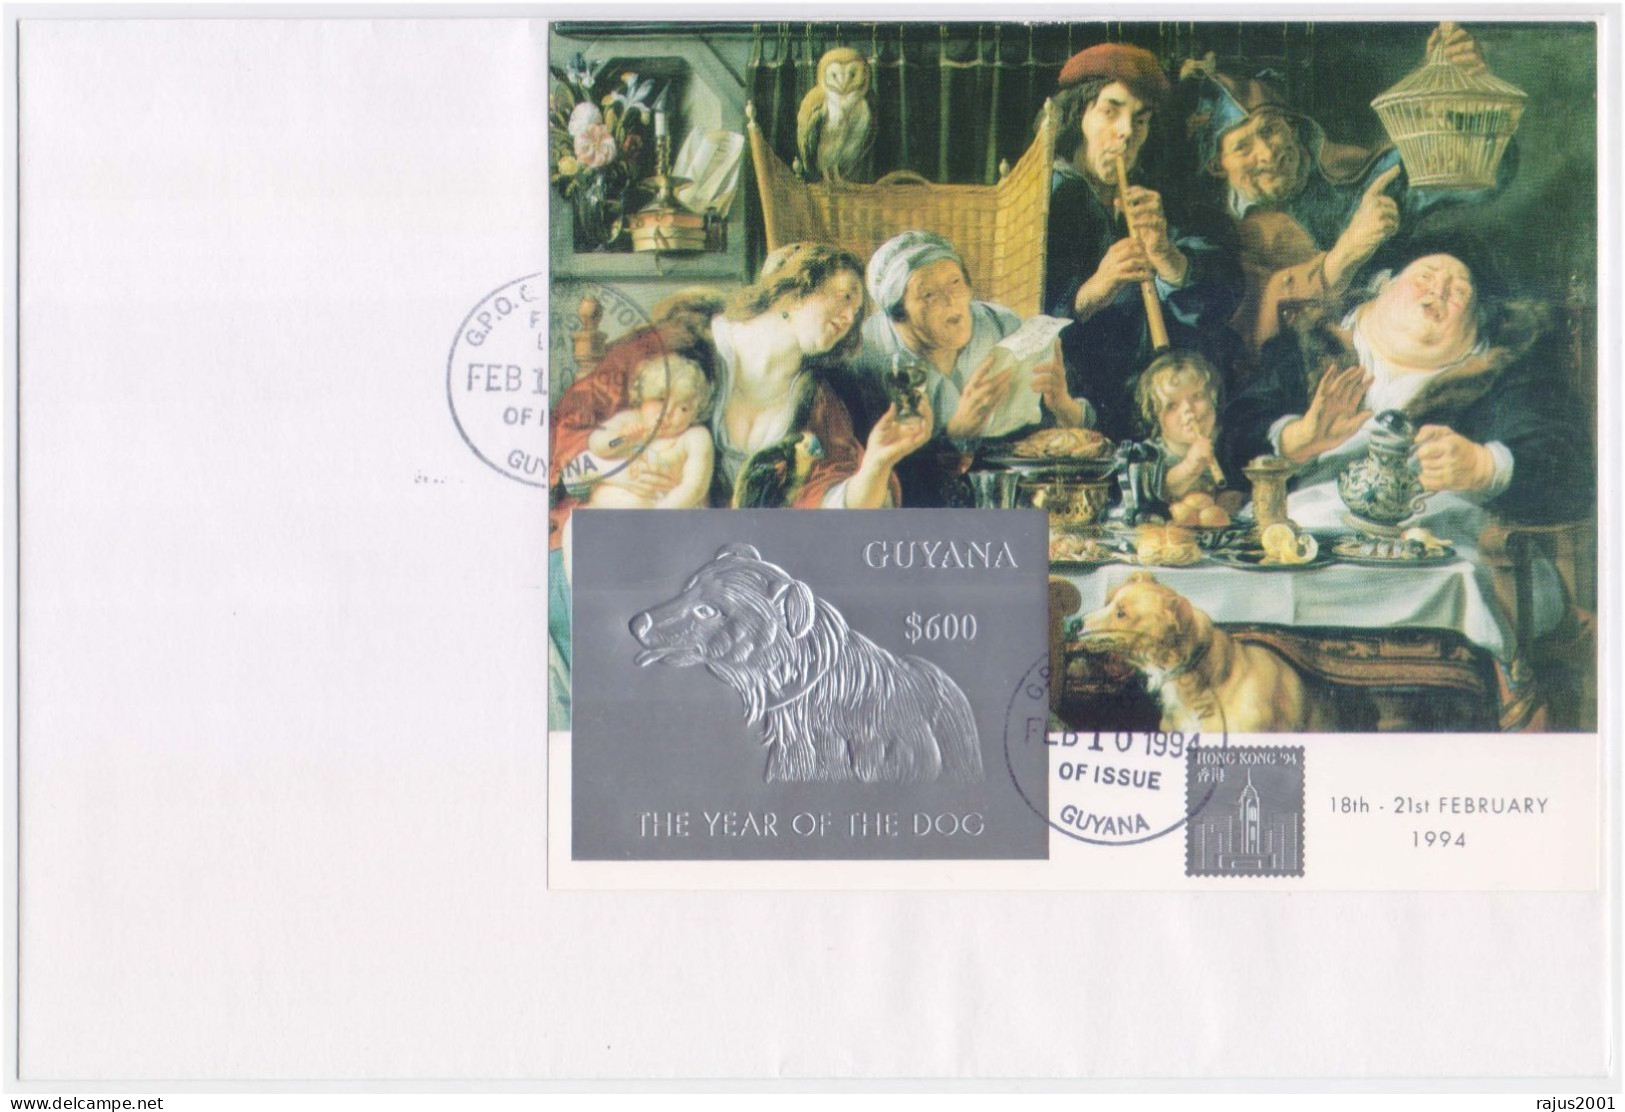 Year Of The Dog, OWL, Hibou, Eule, Birds, Bird, Animal Musical Instrument ODD UNUSUAL Silver MS LIMITED ISSUE FDC Guyana - Erreurs Sur Timbres